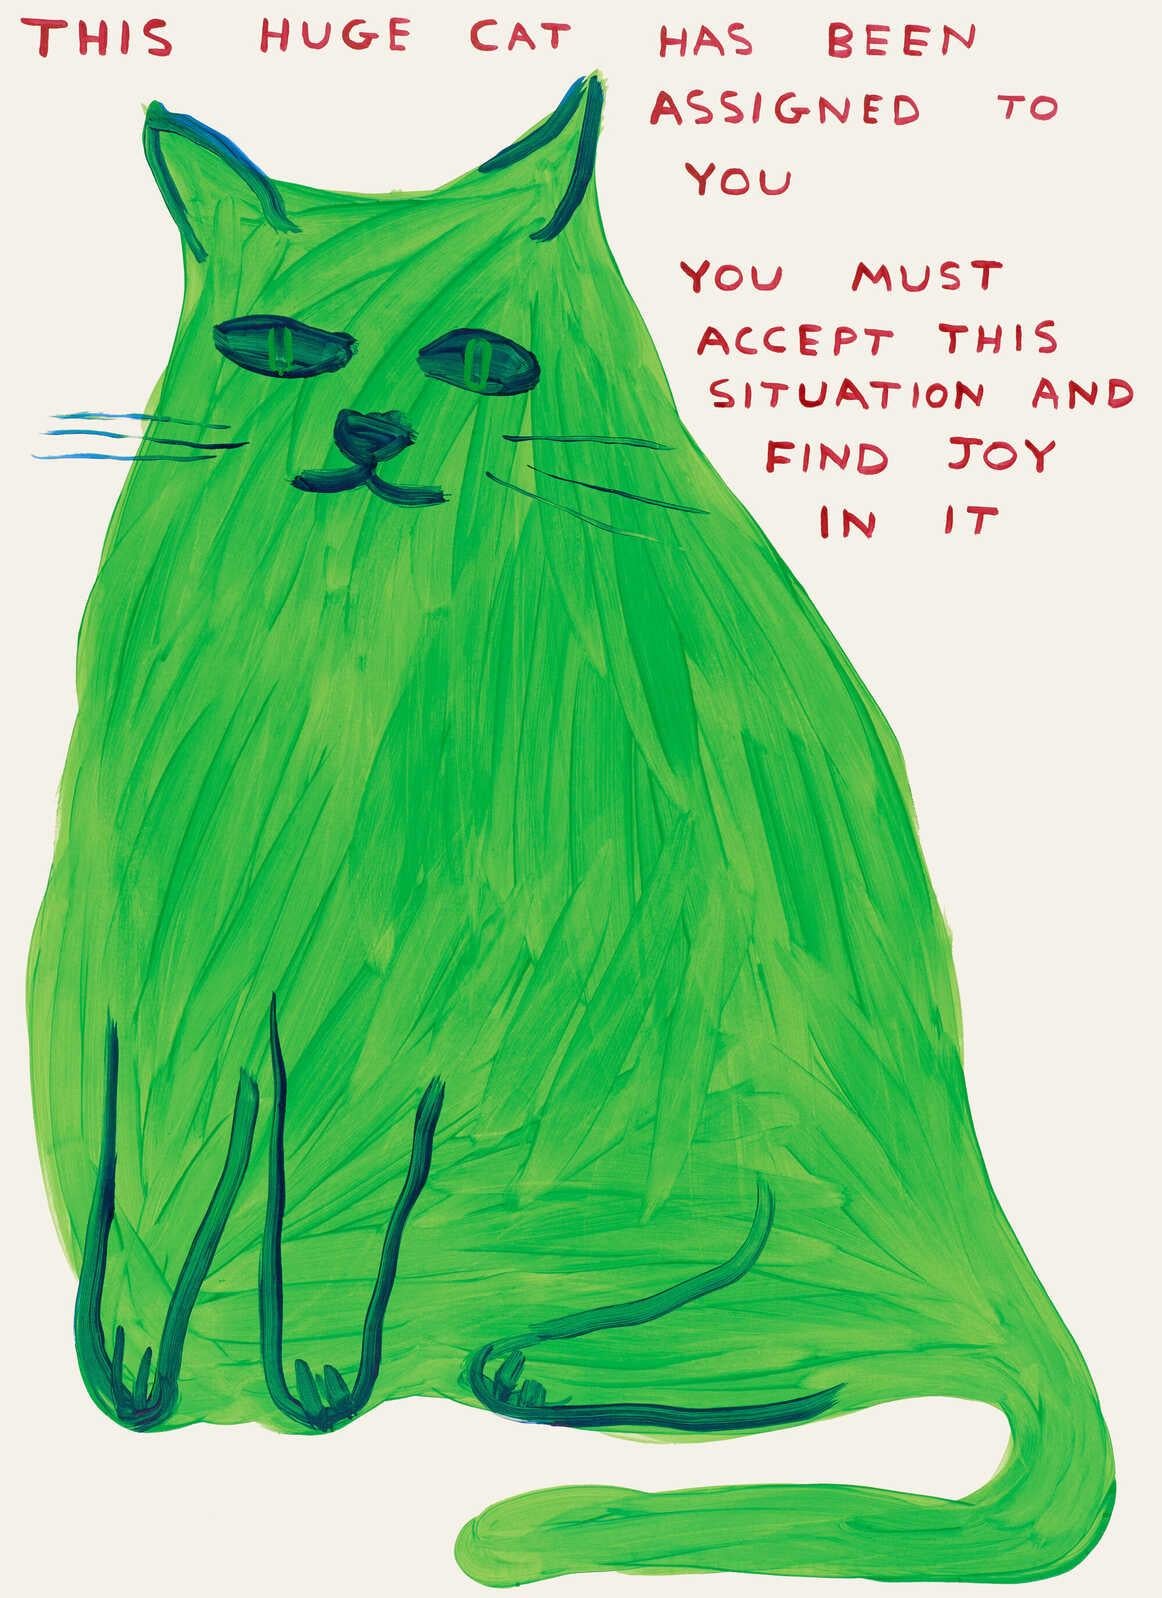 David Shrigley, This Huge Cat, 2023

Offset lithograph on 200 gsm Arctic Vol paper
31 1/2 × 23 3/5 in  80 × 60 cm

David Shrigley was born in 1968 in Macclesfield, UK. He lives and works in Brighton and Devon, UK. In January 2020 the artist was